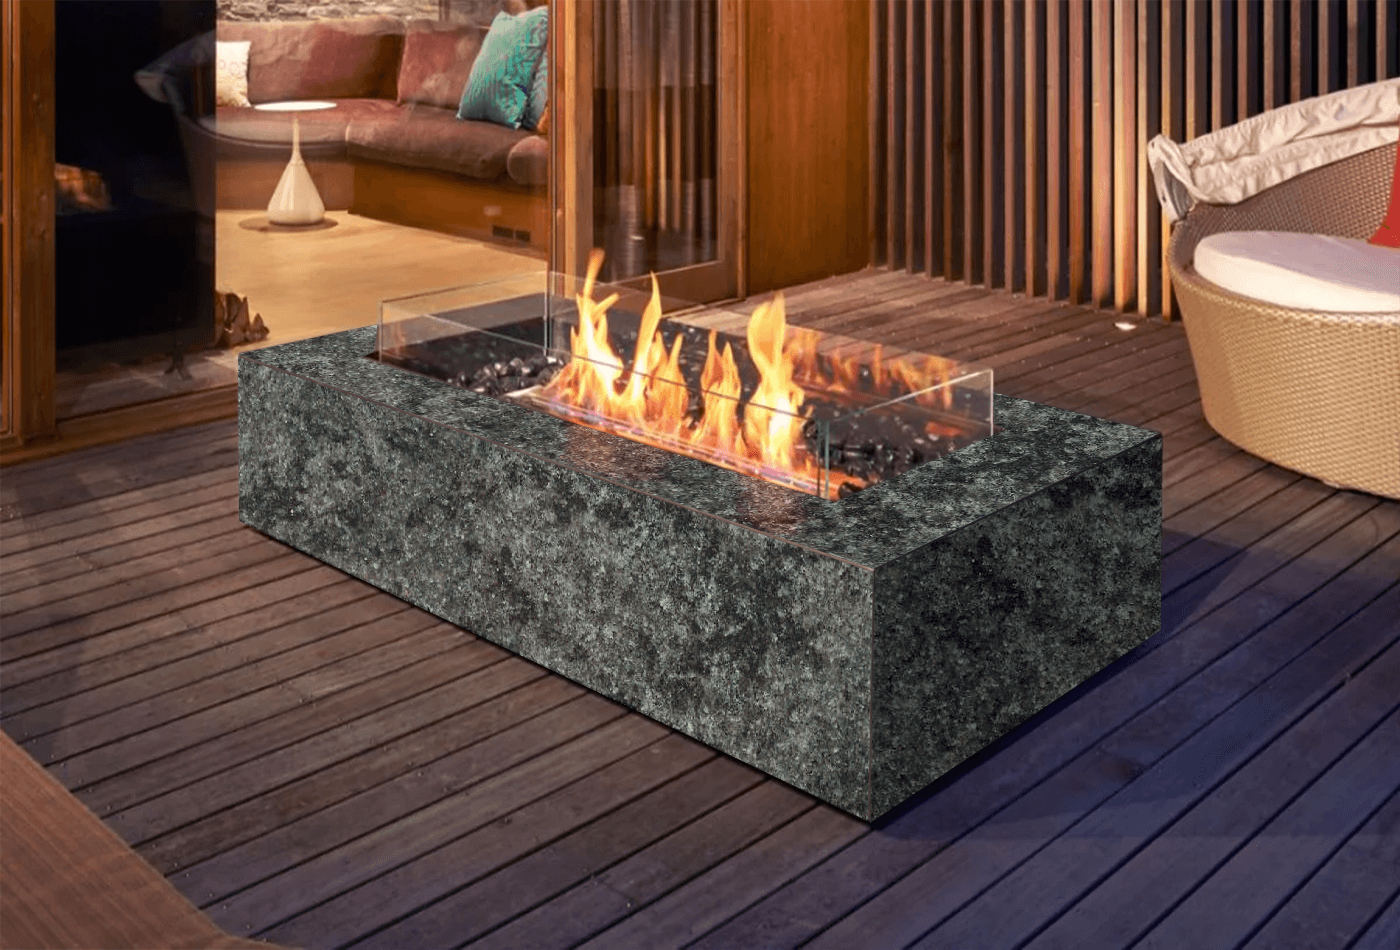 Why would you choose Green Granite for a fire pit